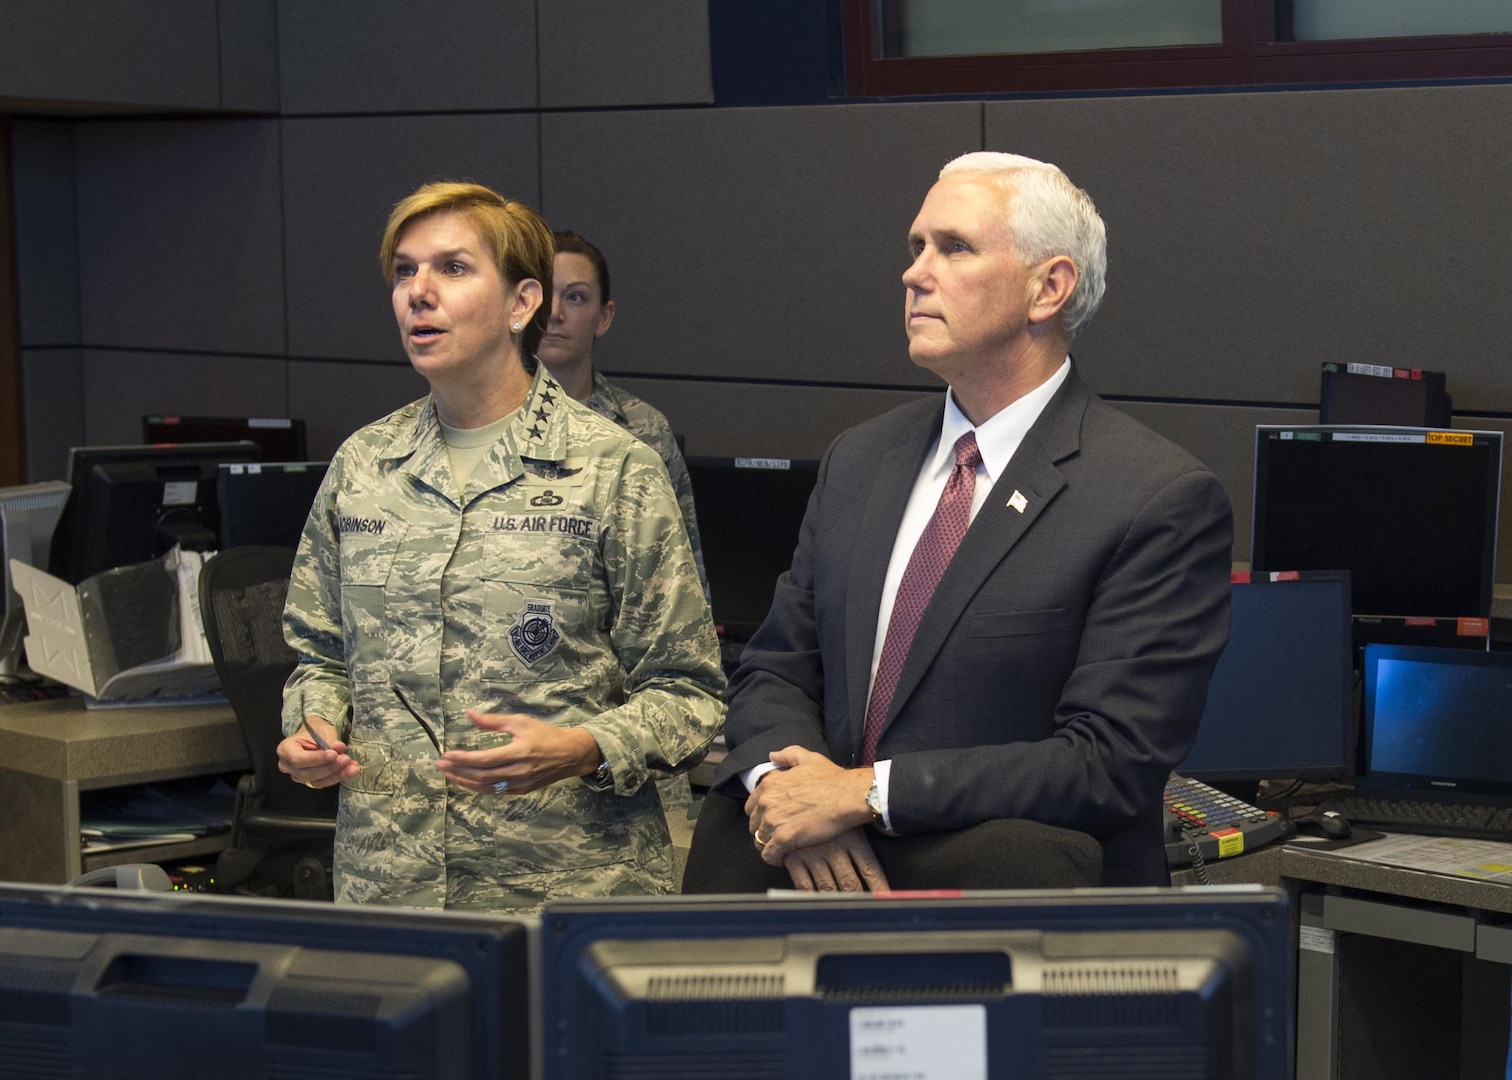 Vice President Michael Pence receives a mission briefing from U.S. Air Force General Lori J. Robinson, the commander of the North American Aerospace Defense Command and U.S. Northern Command inside the Alternate Command Center at Cheyenne Mountain Air Force Station, June 23, 2017. The Vice President was accompanied by the Secretary of the Air Force, the Honorable Heather Wilson, and received briefings to better familiarize them with the unique mission that NORAD and USNORTHCOM have in defense of Canada and the United States.  (DoD Photo By: N&NC Public Affairs/Released)